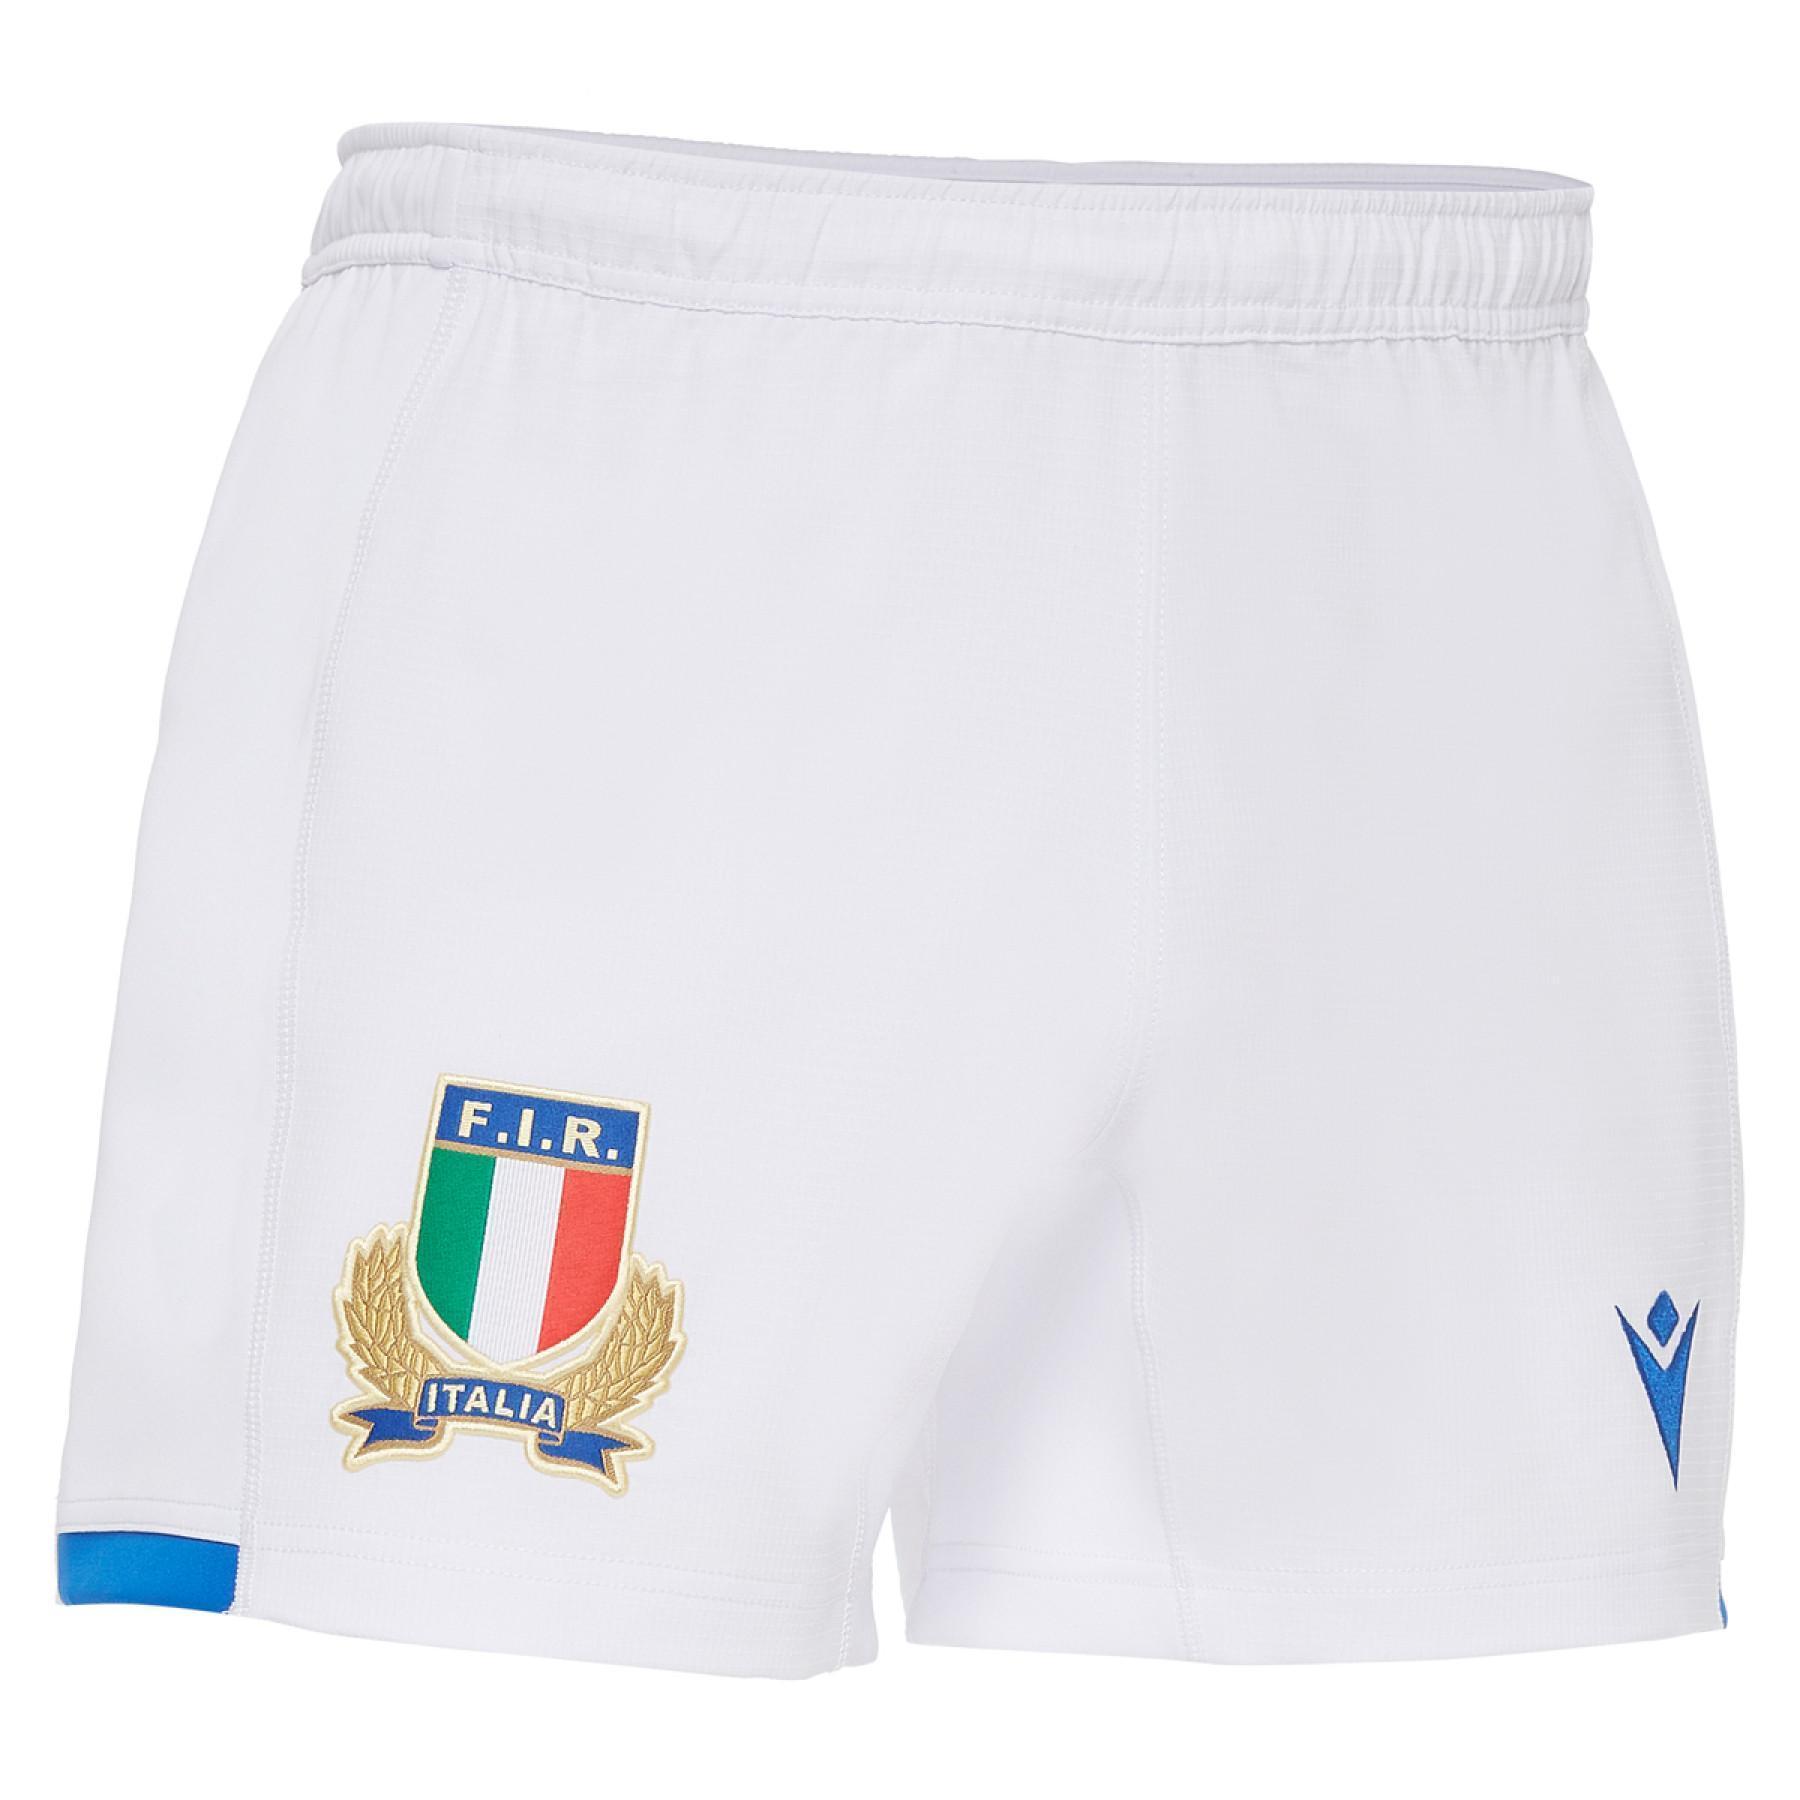 Home shorts Italien rugby 2020/21